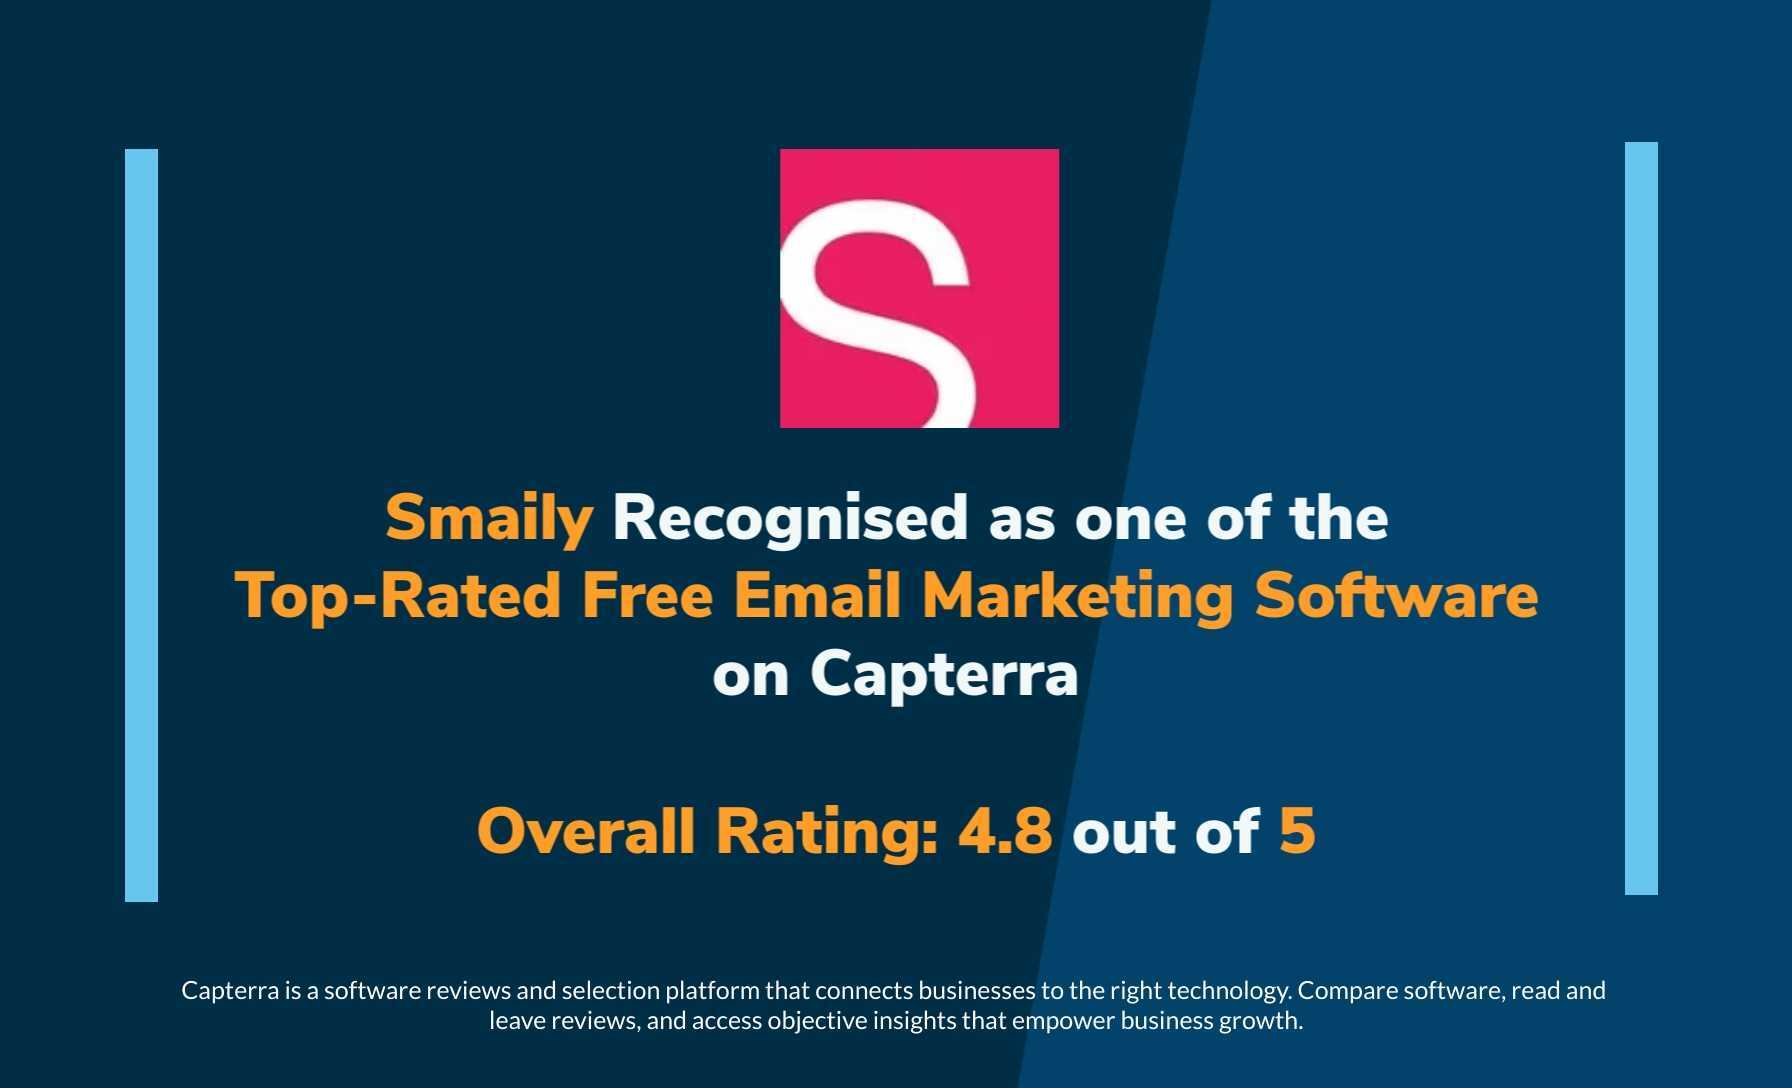 Smaily Email Marketing Software Featured on Capterra